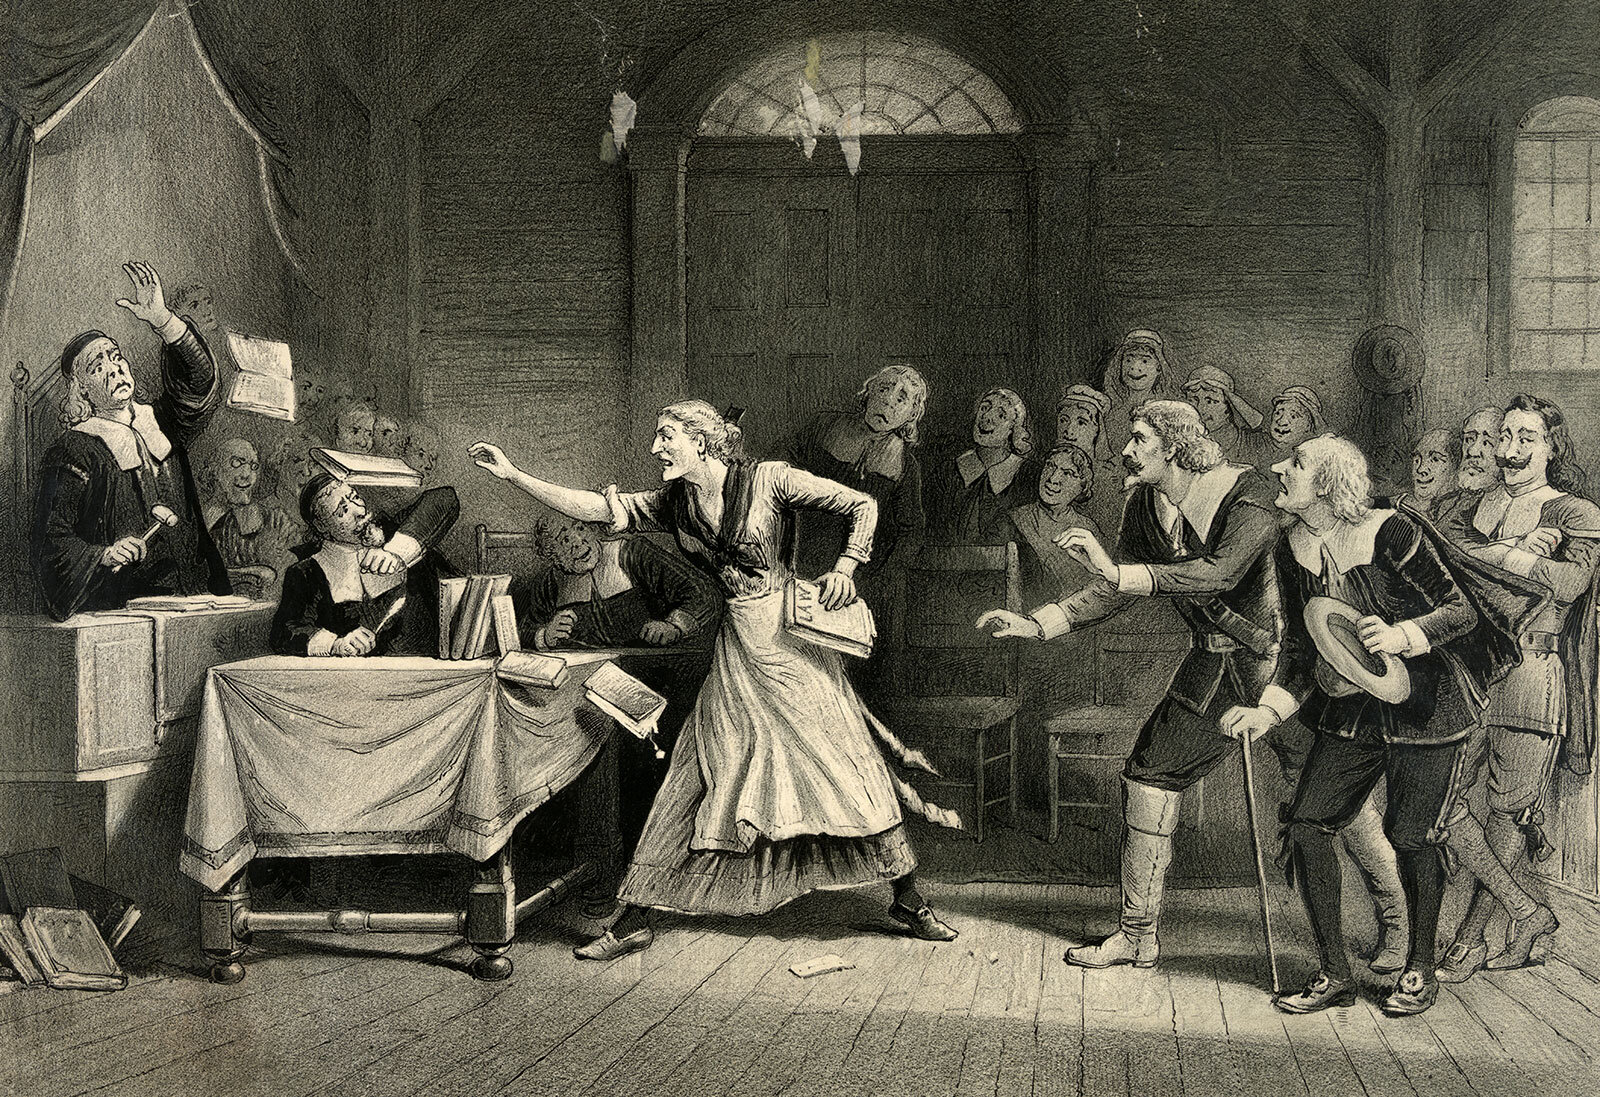 An artist's rendition of the Salem witch trials